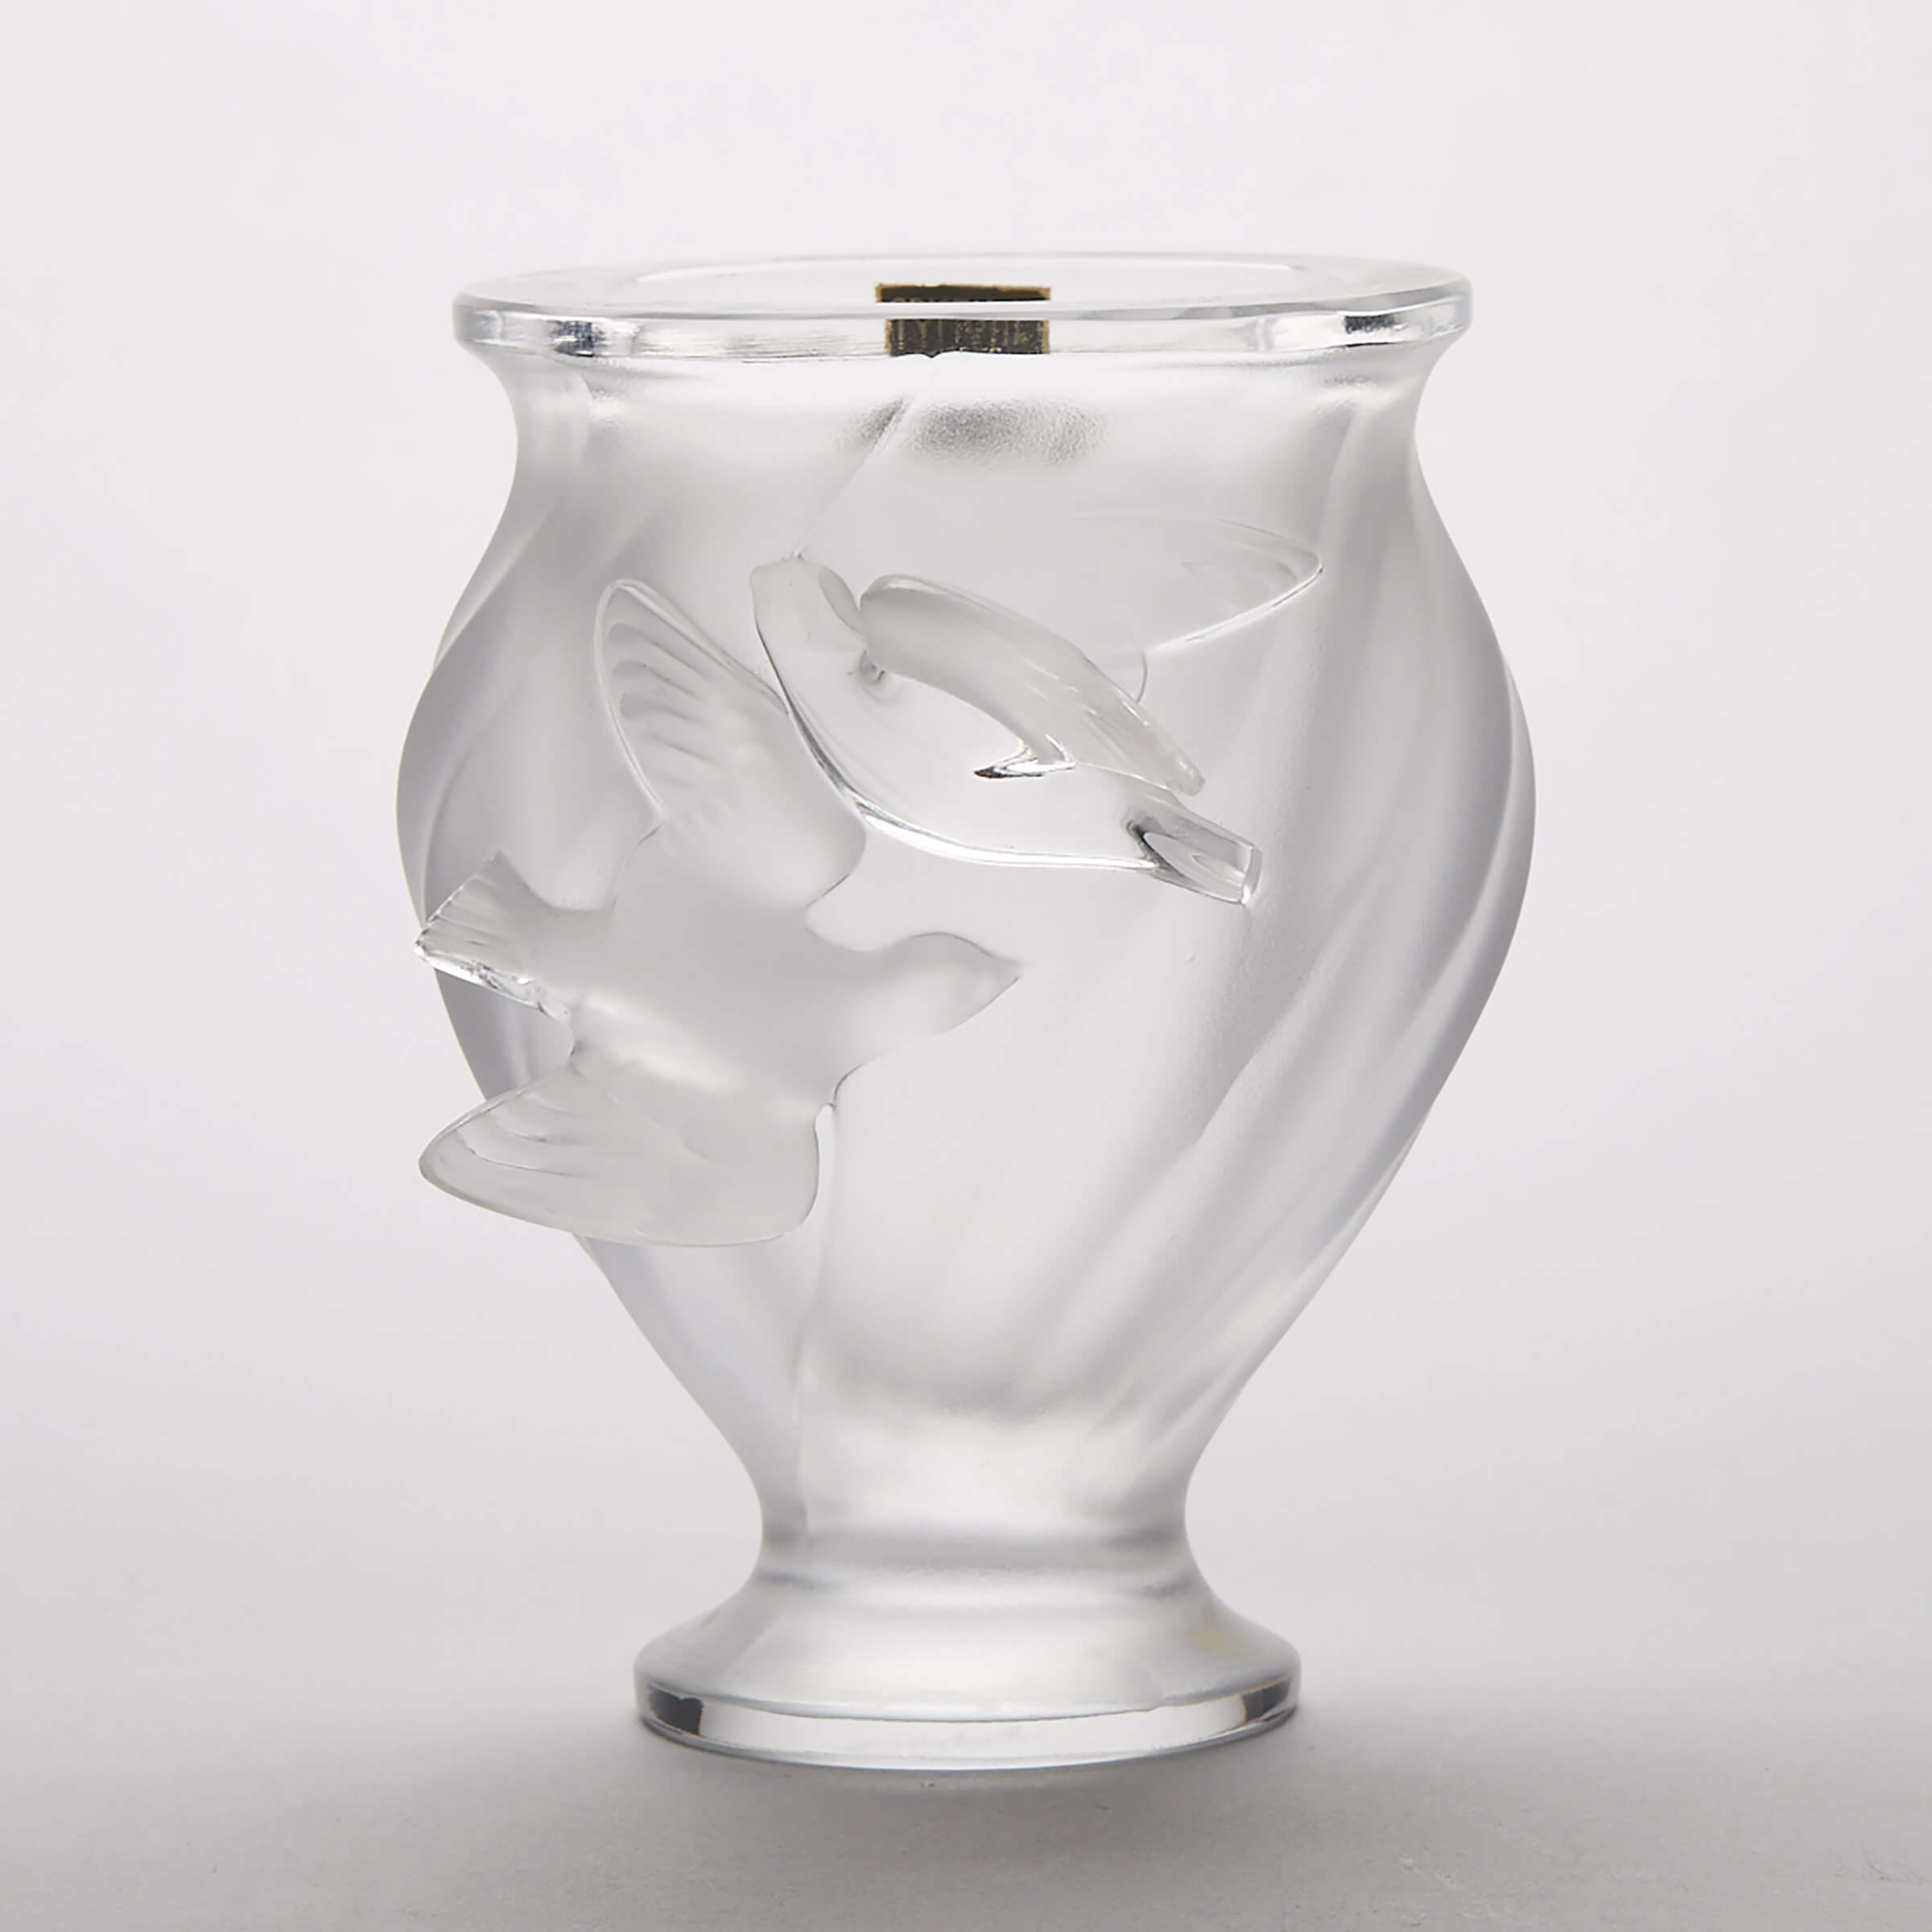 ‘Rosine’, Lalique Moulded and Frosted Glass Vase, post-1945